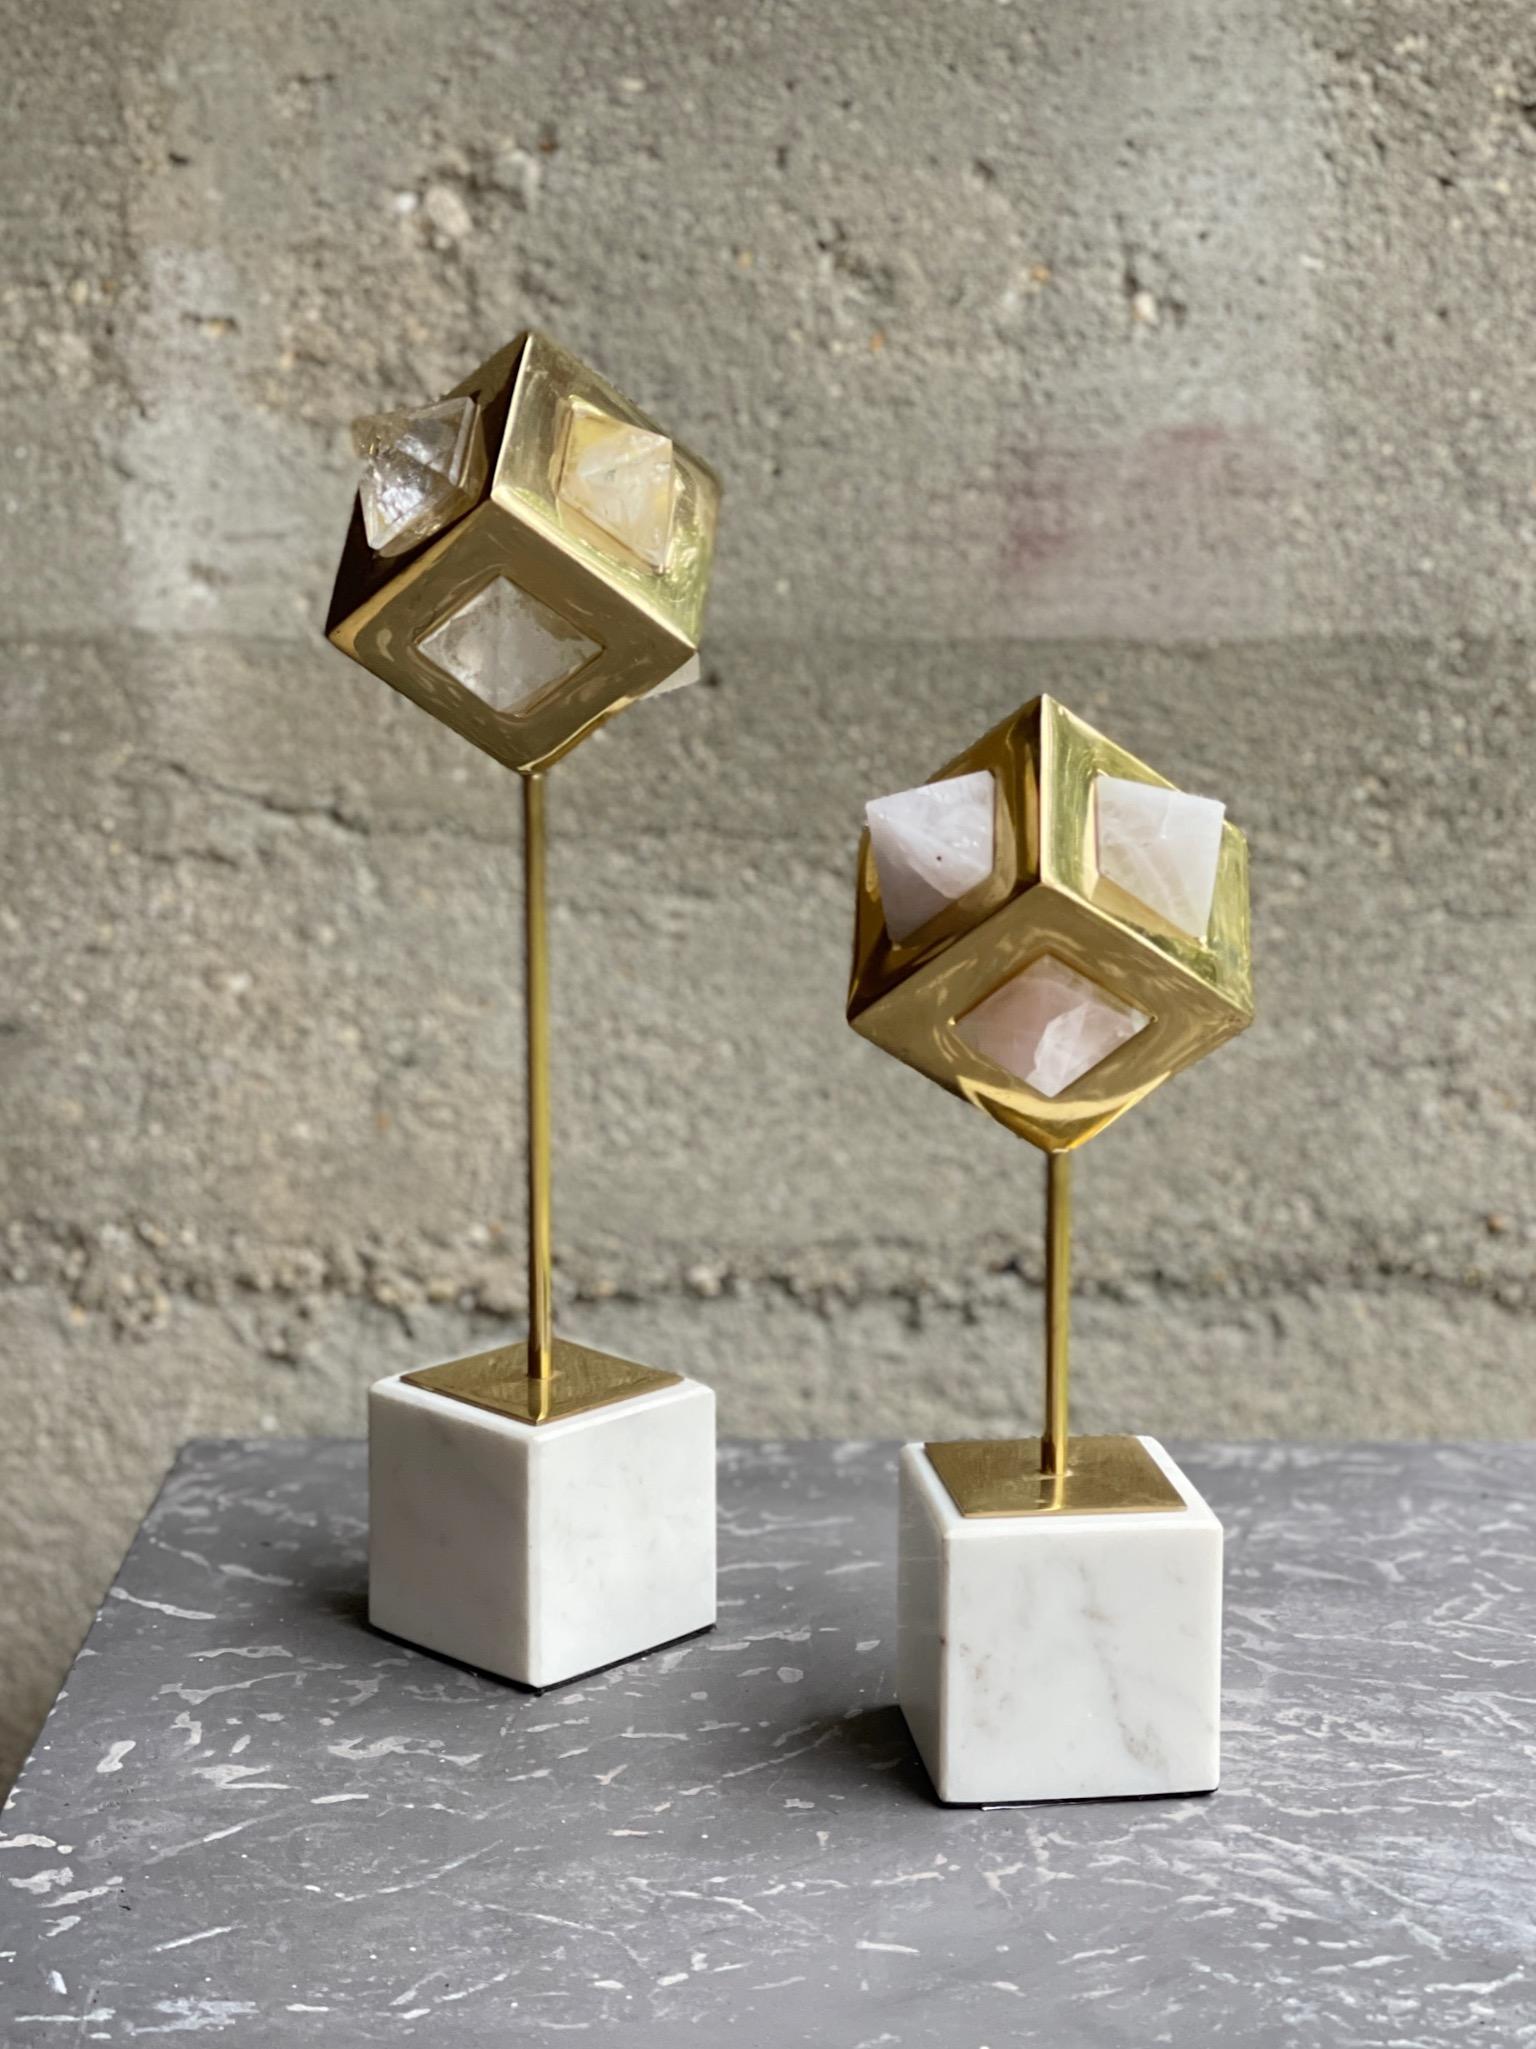 Pair of stunning 'New Age' Organic Modern sculptures with faceted natural rock crystal quart wrapped in solid  brass bezels on honed marble bases

These geometric sculptures  are comprised o two different  types of rock crystals, the taller 13